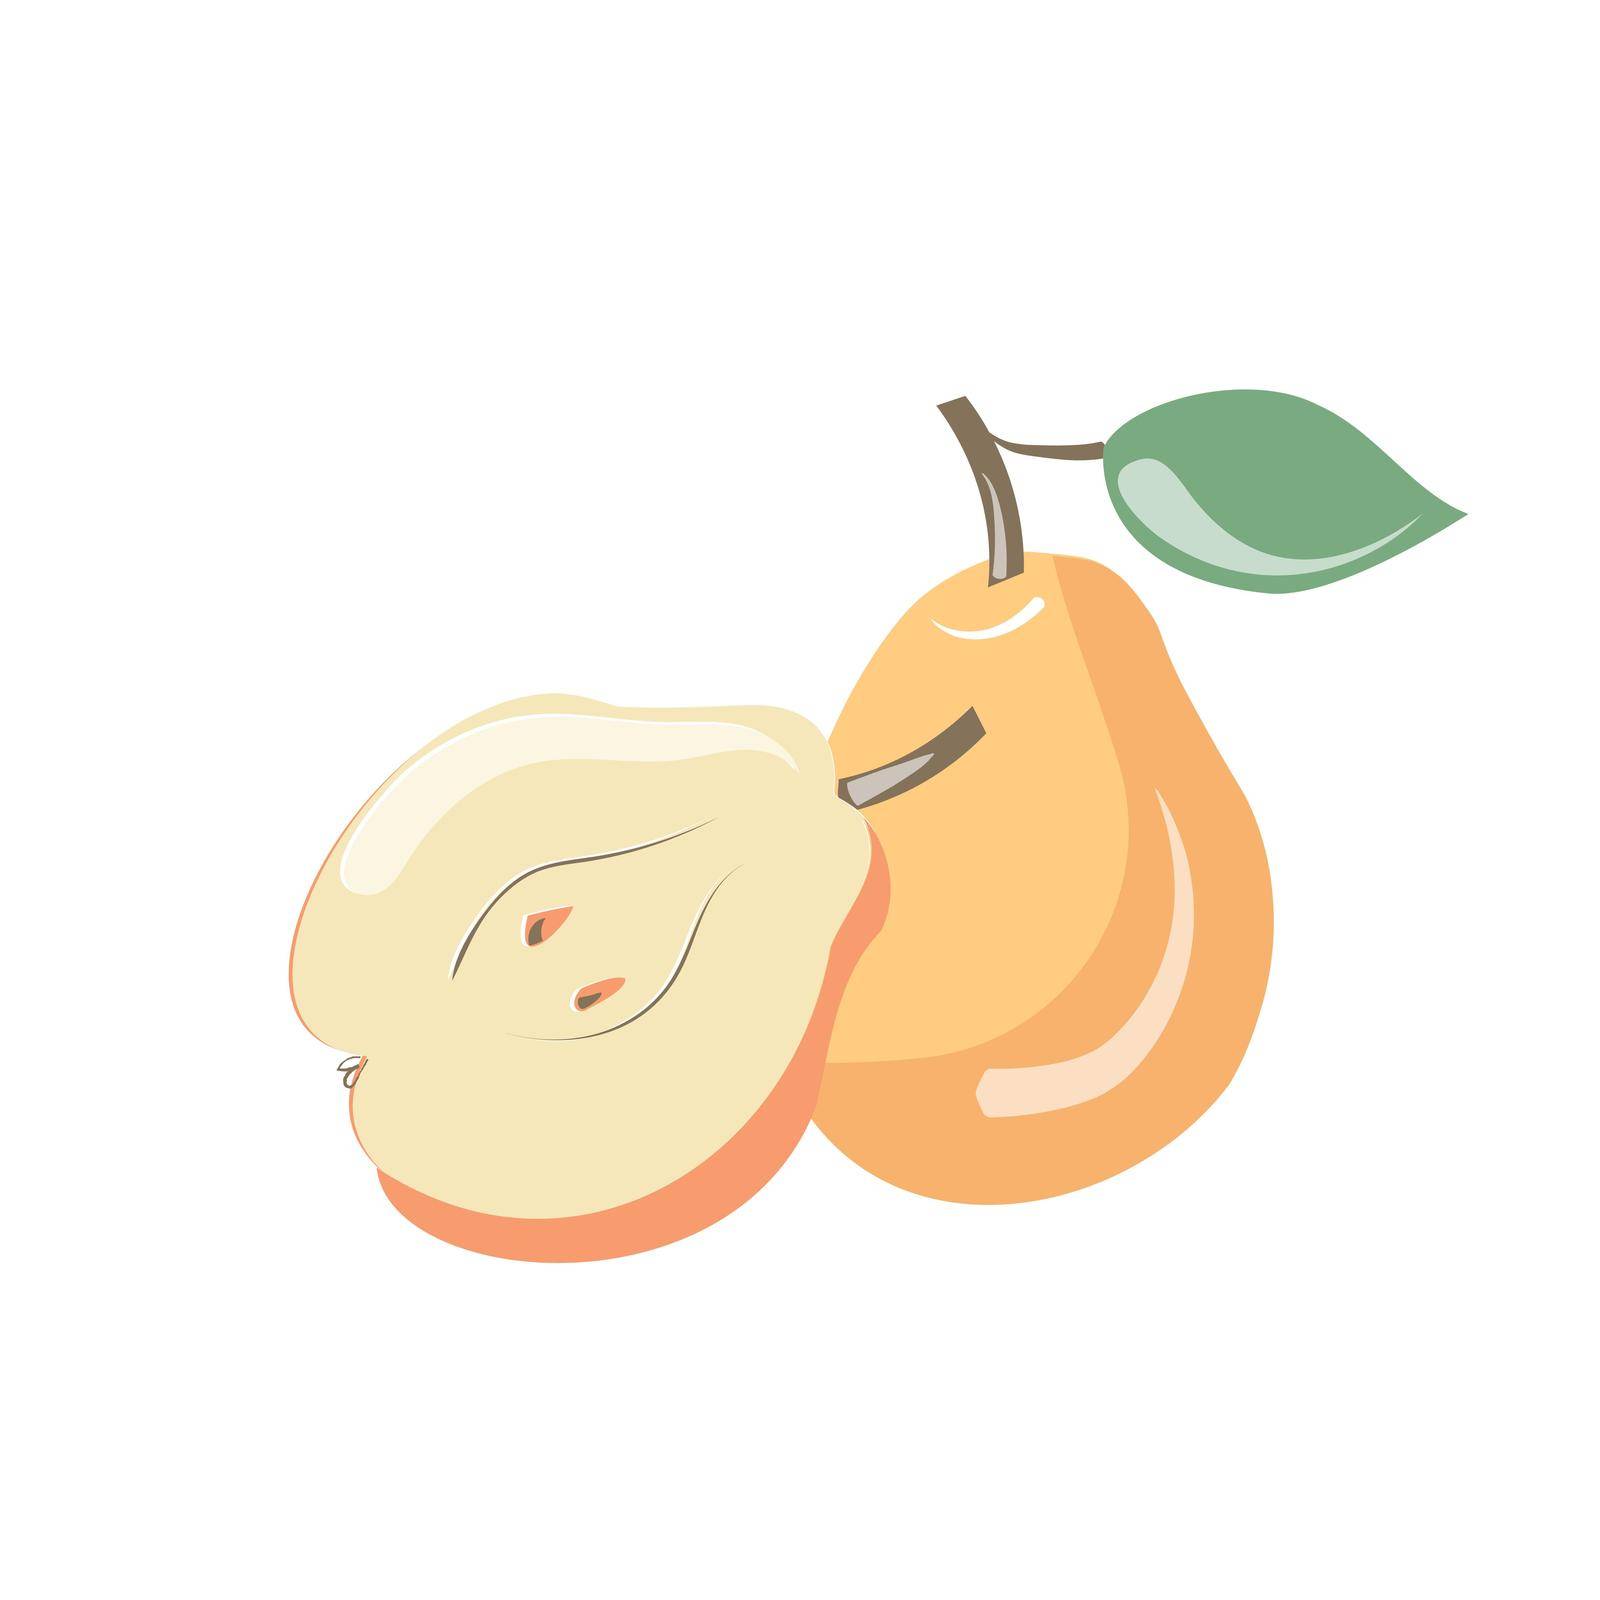 A whole pear fruit and half a pear. Isolated vector image